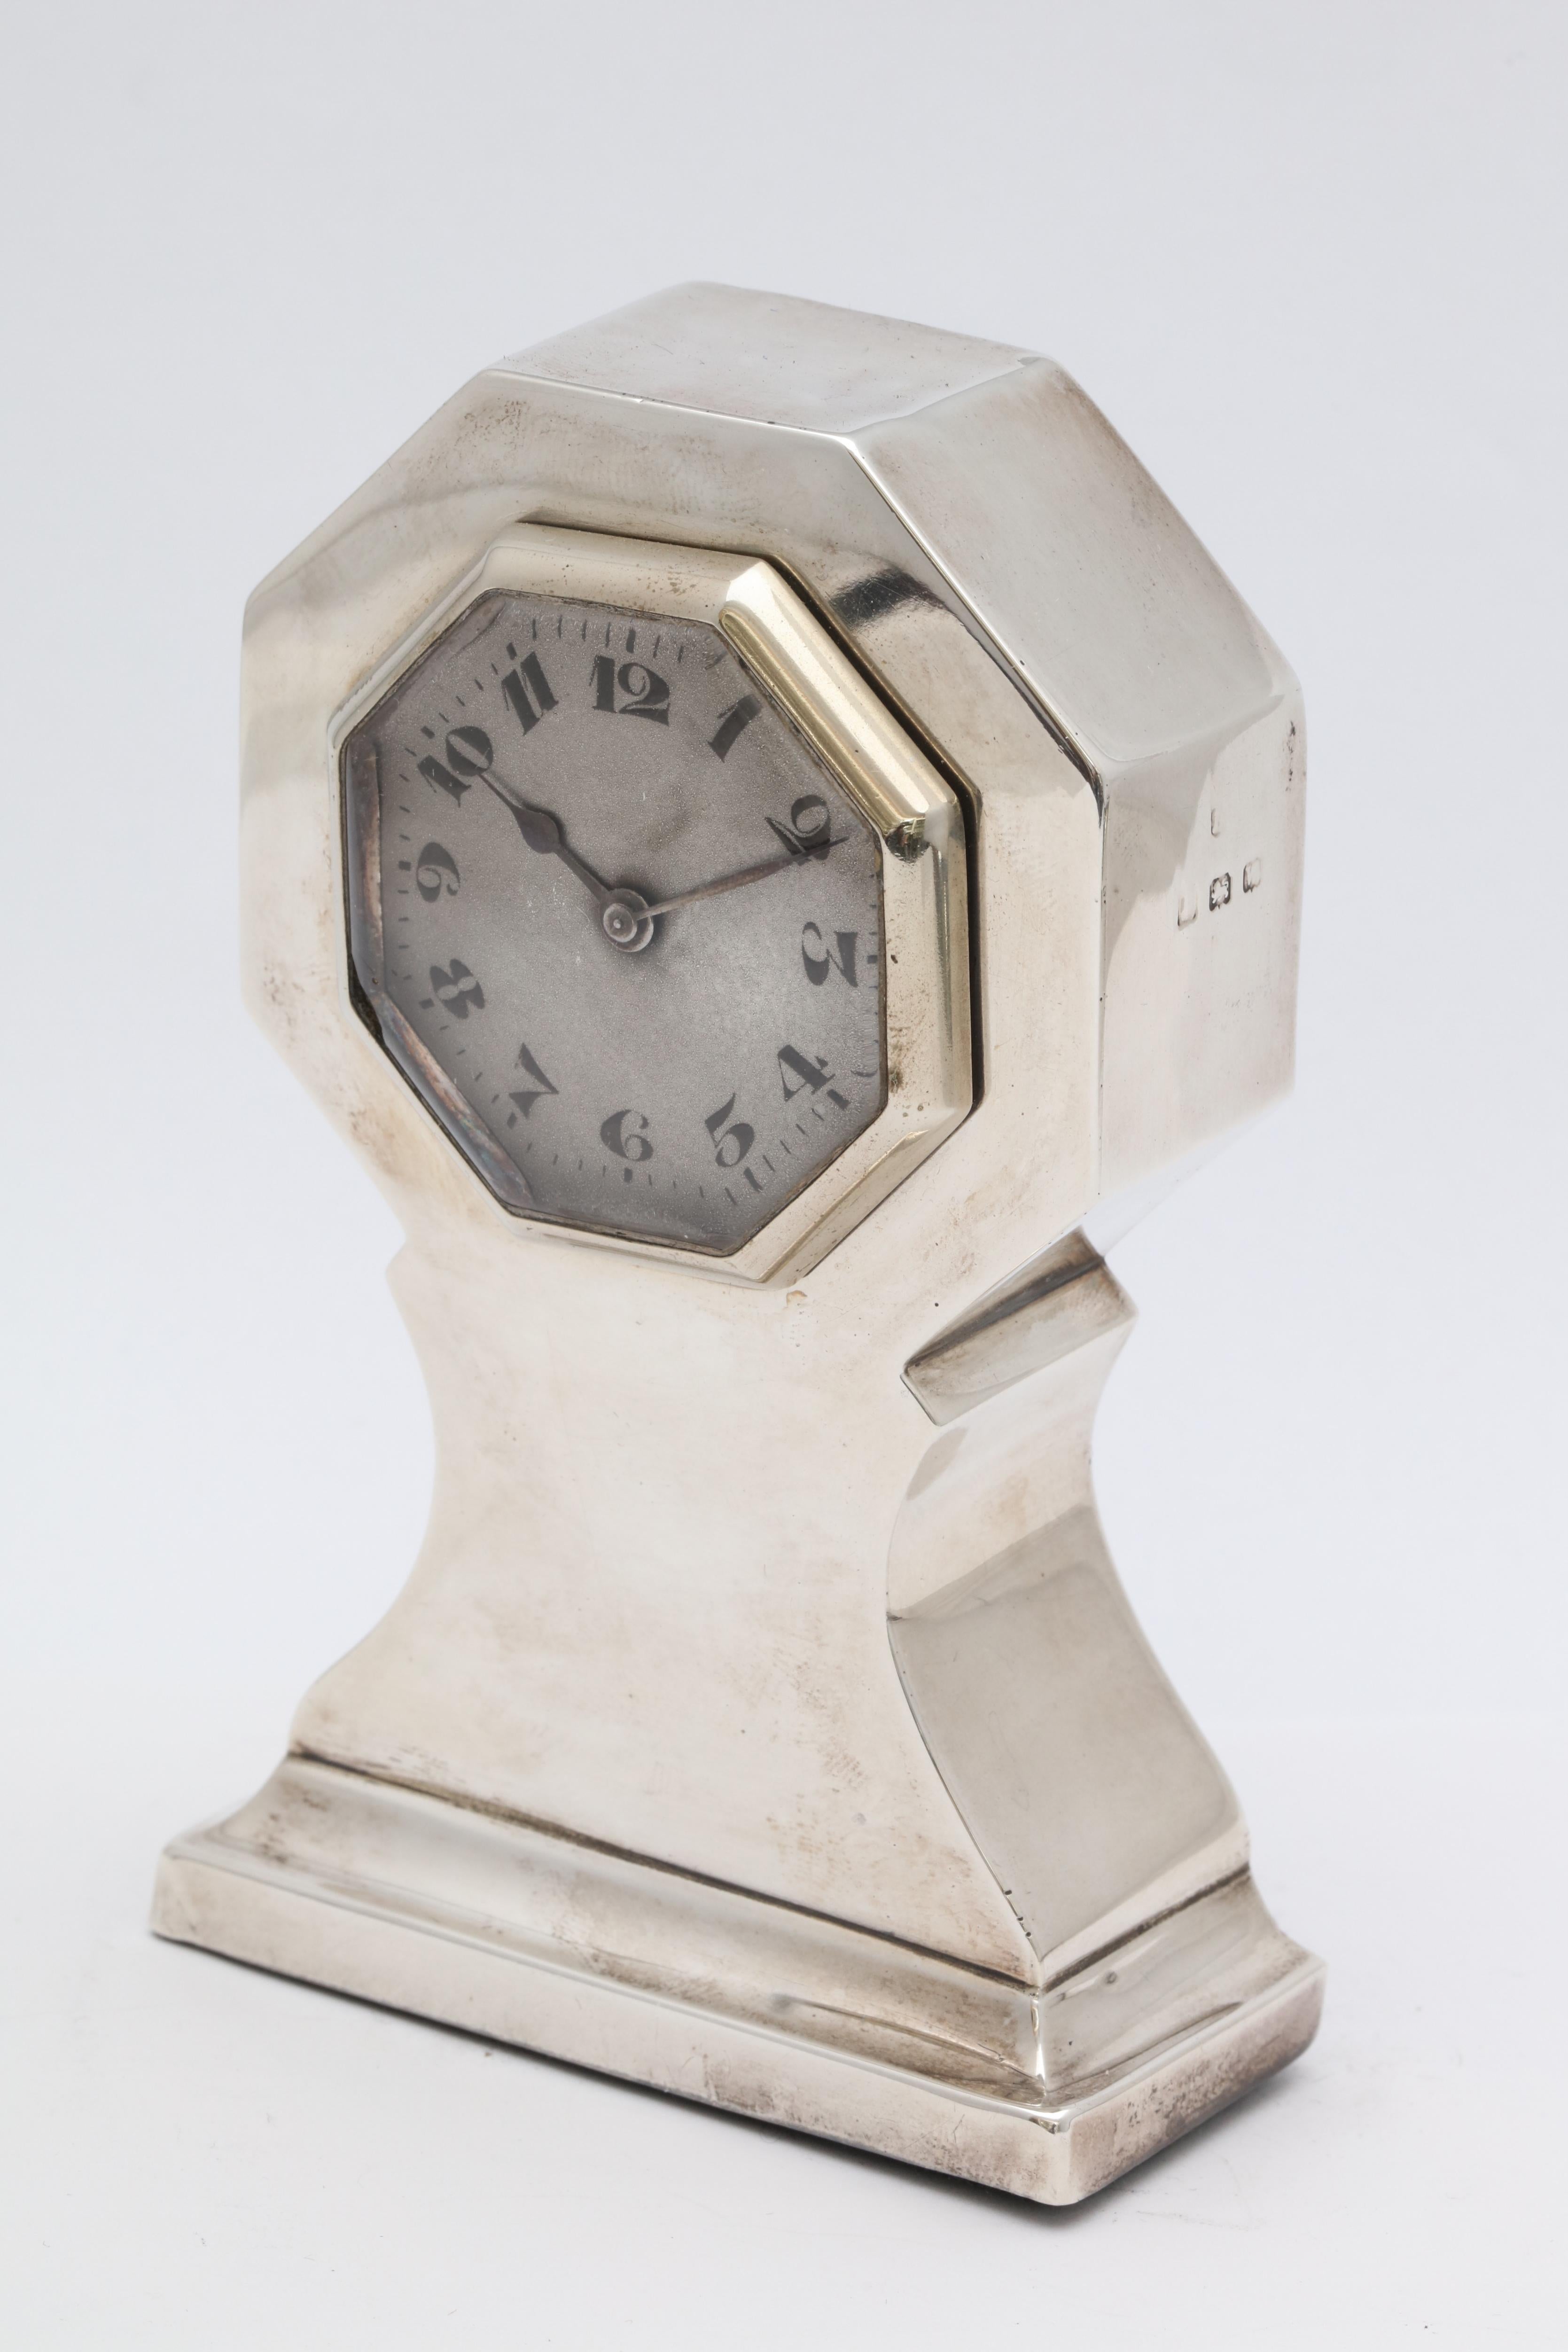 Art Deco, sterling silver, table clock, Birmingham, England, 1921, maker's mark rubbed. Stands 4 1/4 inches high x 2 3/4 inches wide (at widest point) x 1 1/4 inches deep. Wood back. Some very minor dints in the sterling silver, some minor scratches